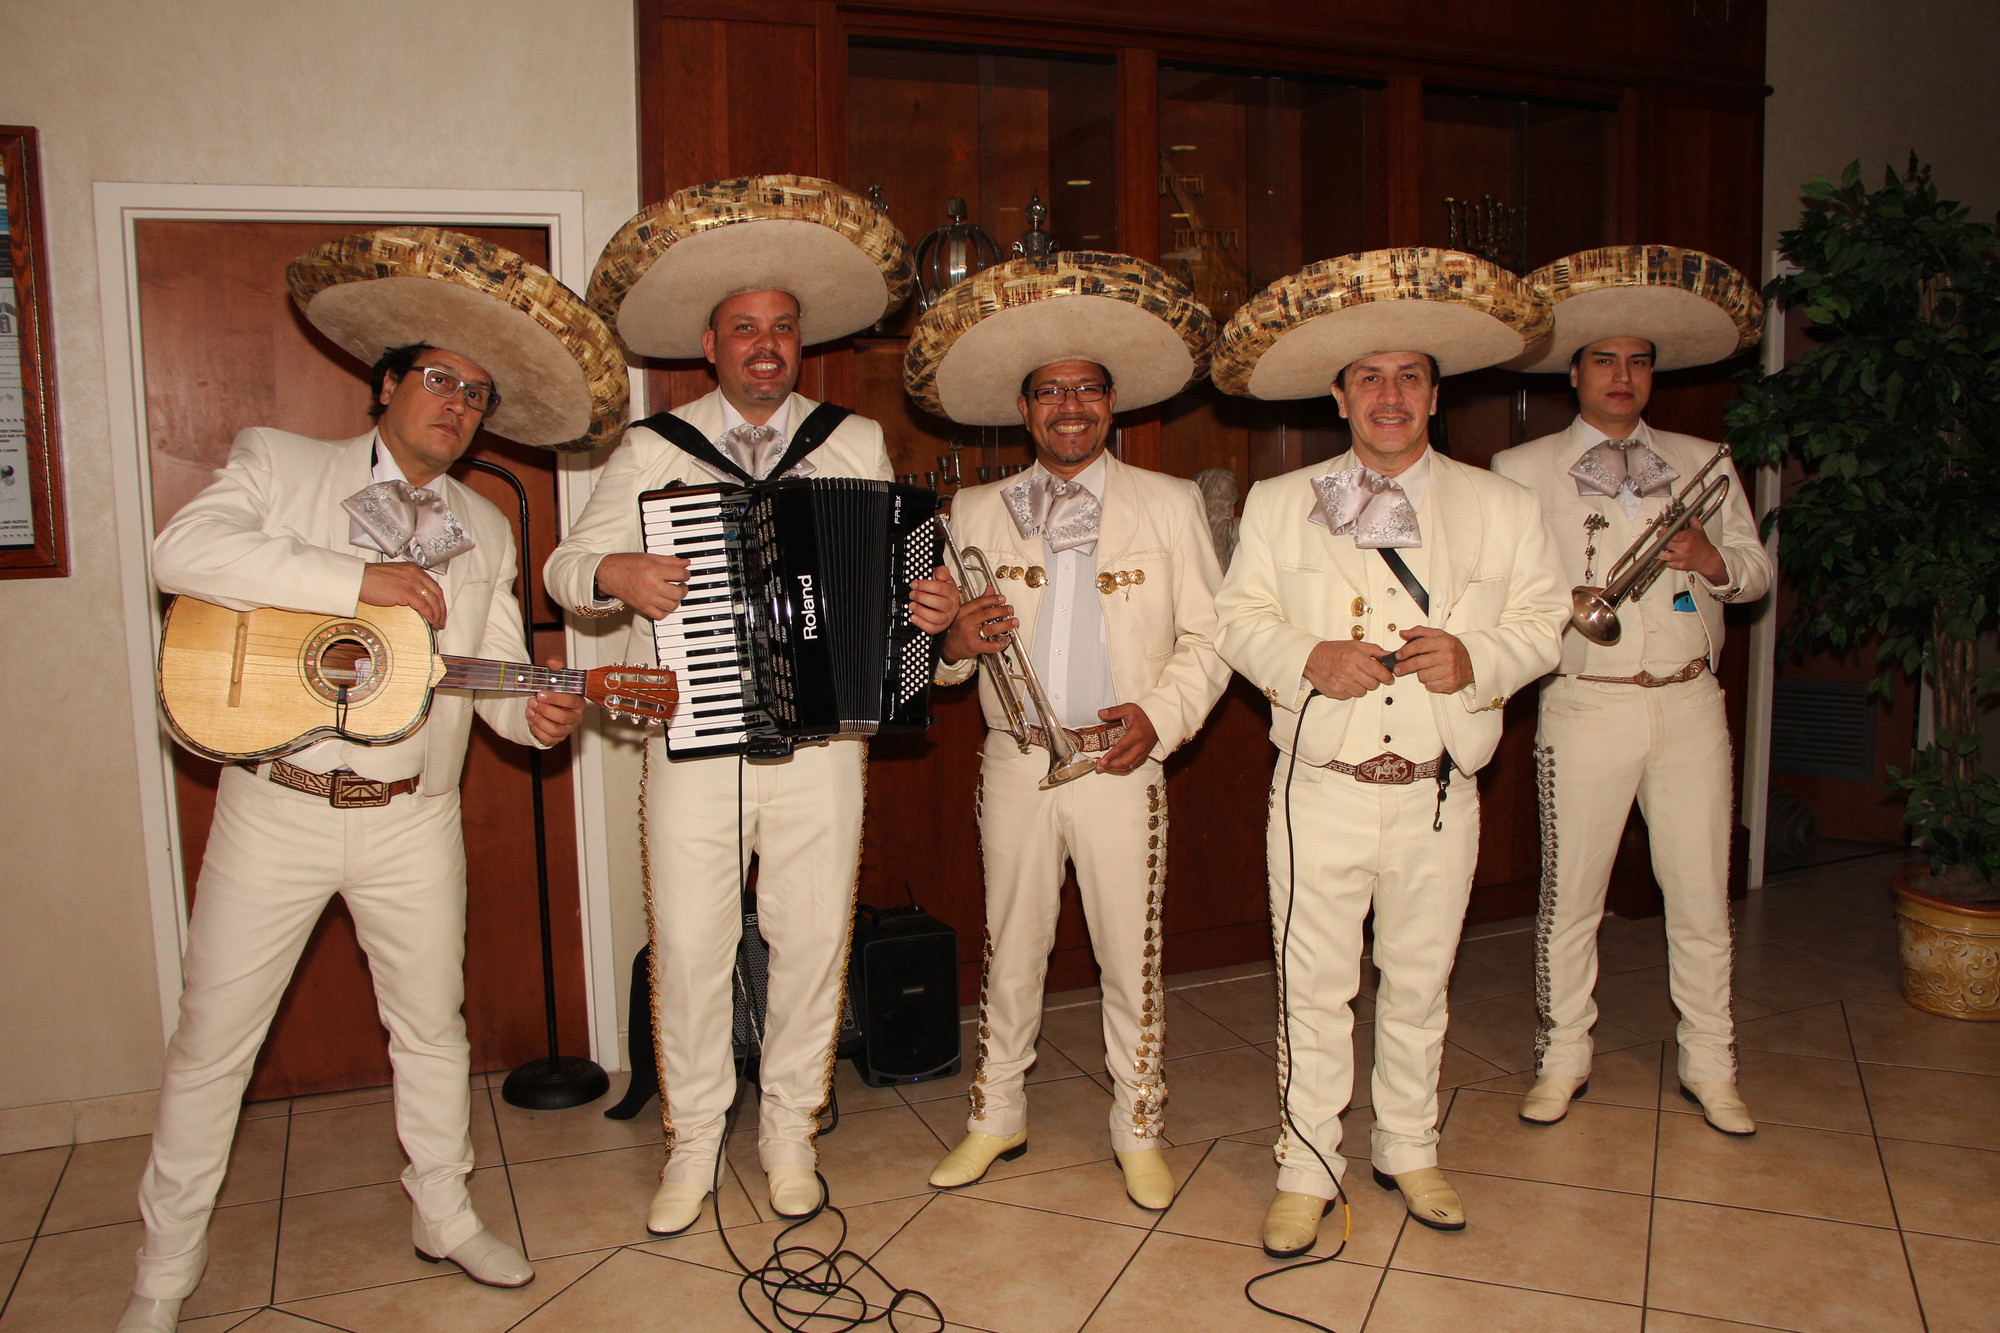 Marachi Mendoza Band provided musical entertainment for the evening.